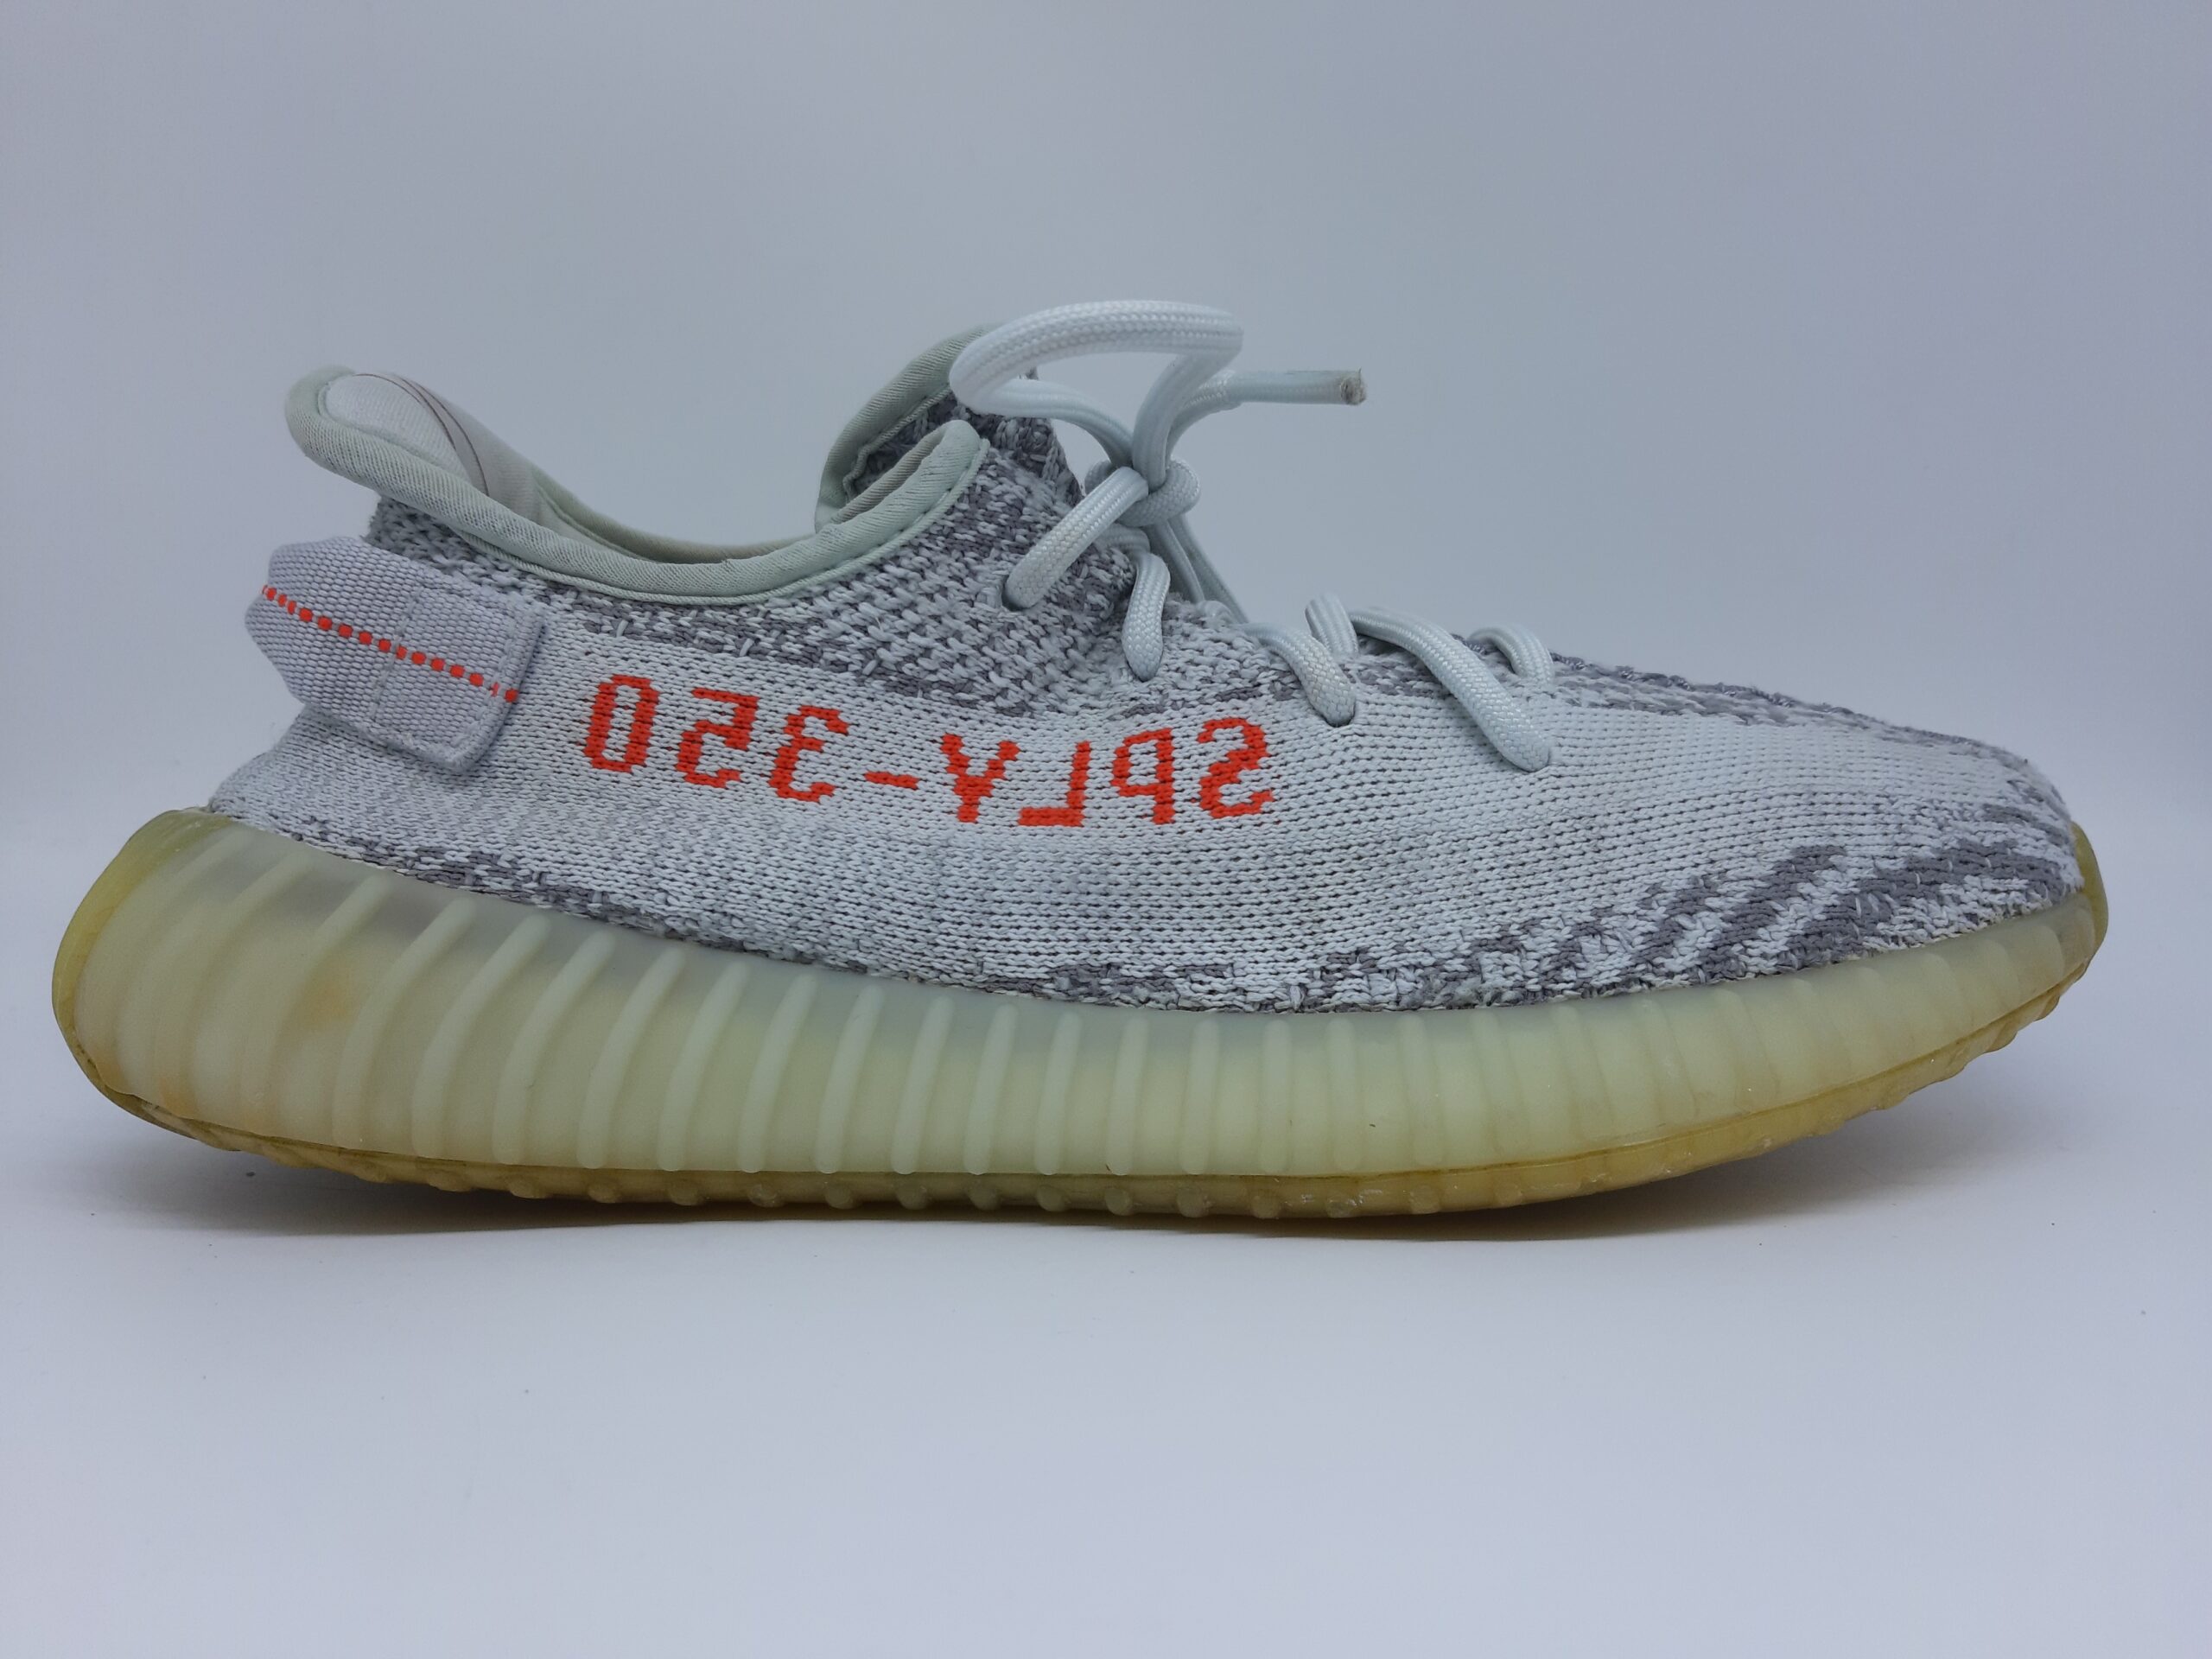 Adidas Yeezy Boost 350 V2 Blue Tint | Refurbished Sneakers